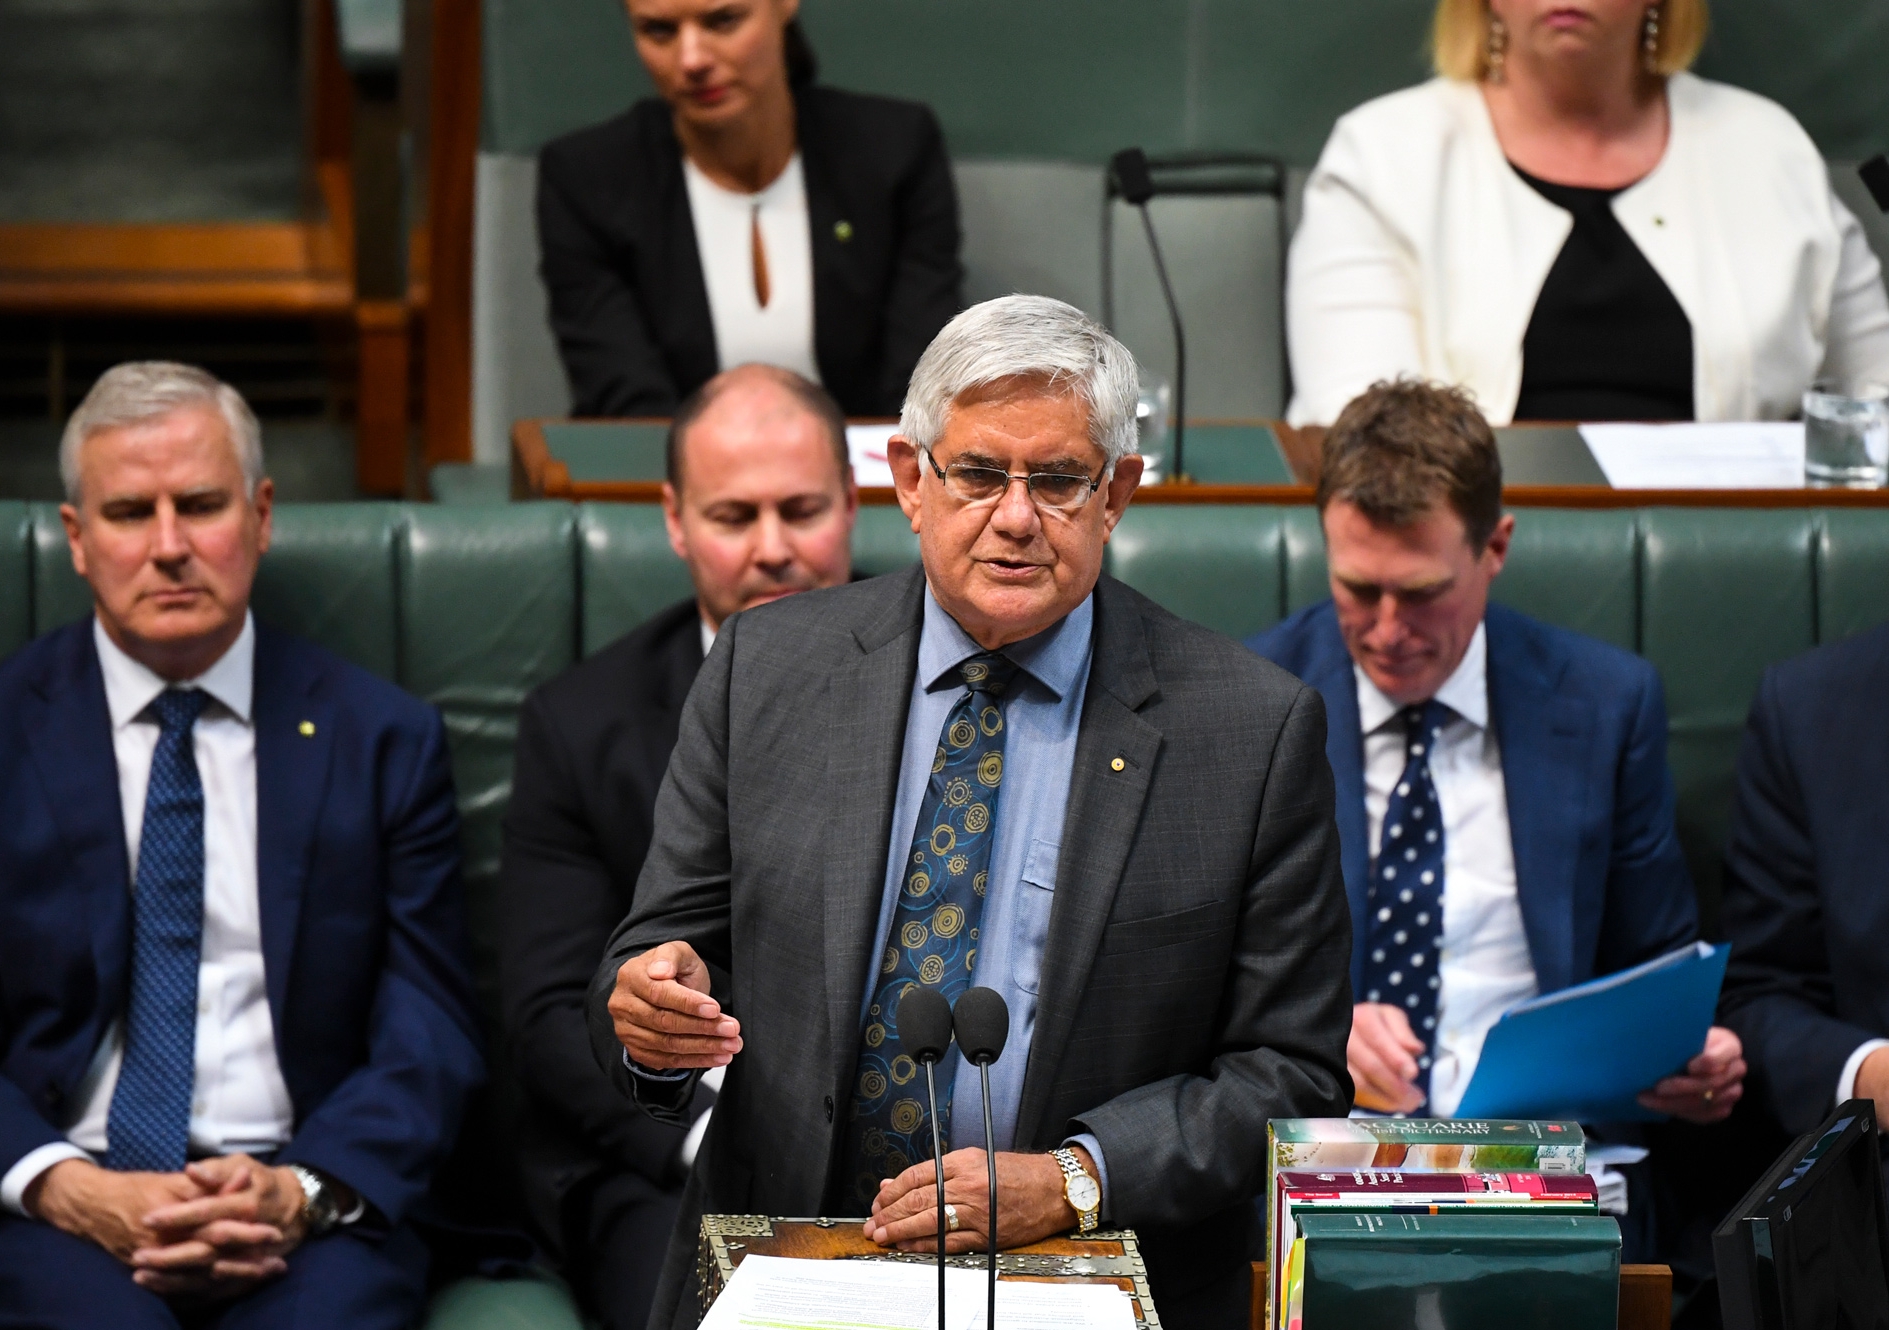 Public submissions to the Indigenous Voice Co-design Process also reveal that people do not want an Indigenous Voice to Parliament legislated. Photo: Australian Indigenous Affairs Minister Ken Wyatt speaks during House of Representatives Question Time at Parliament House. Lukas Coch/AAP